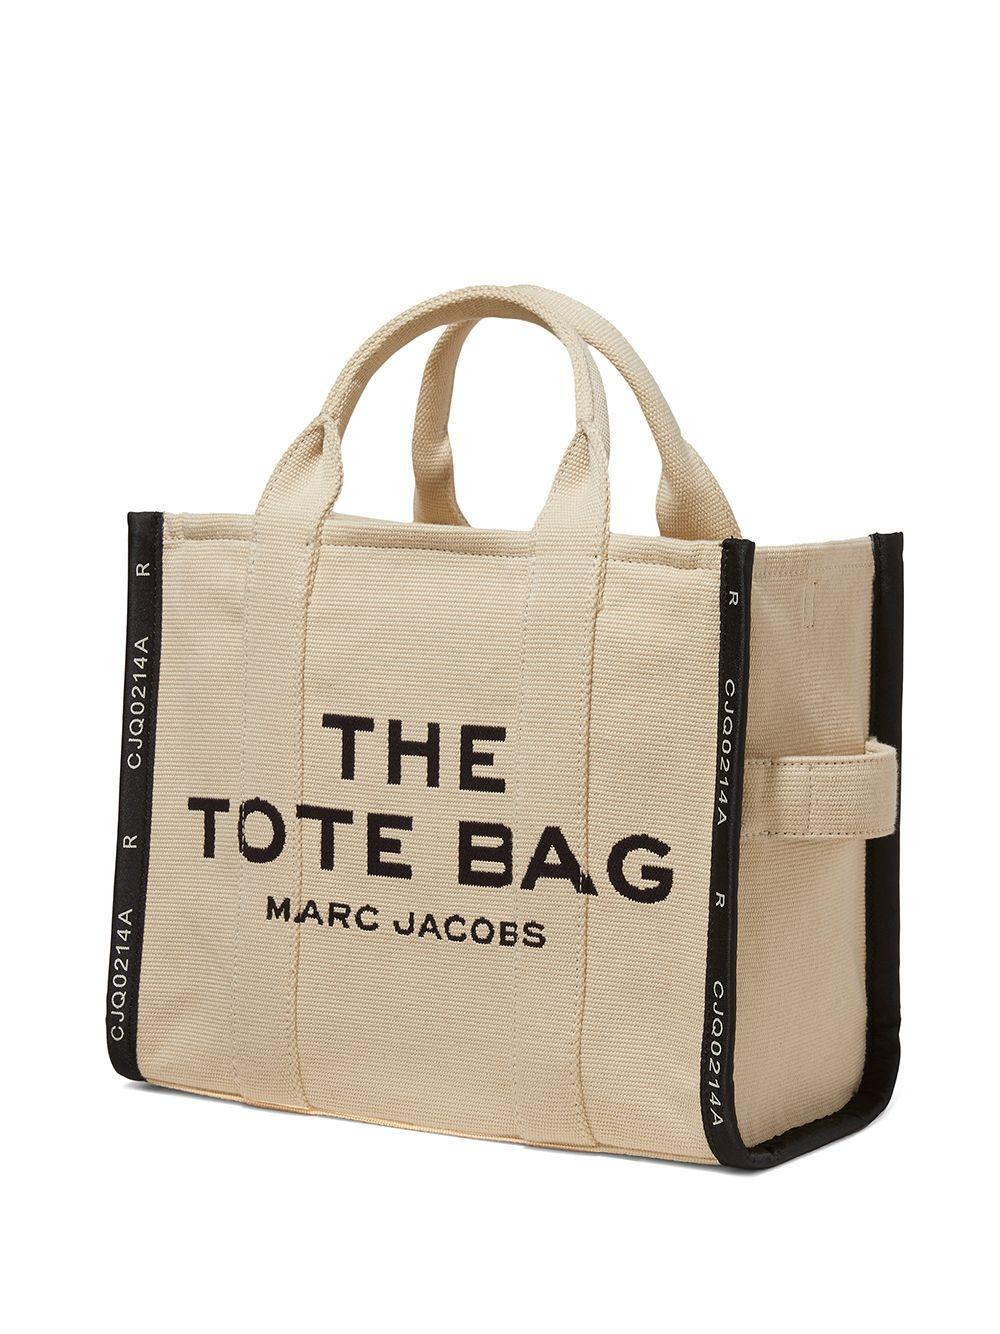 The Small Tote Bag Marc Jacobs Warm Sand